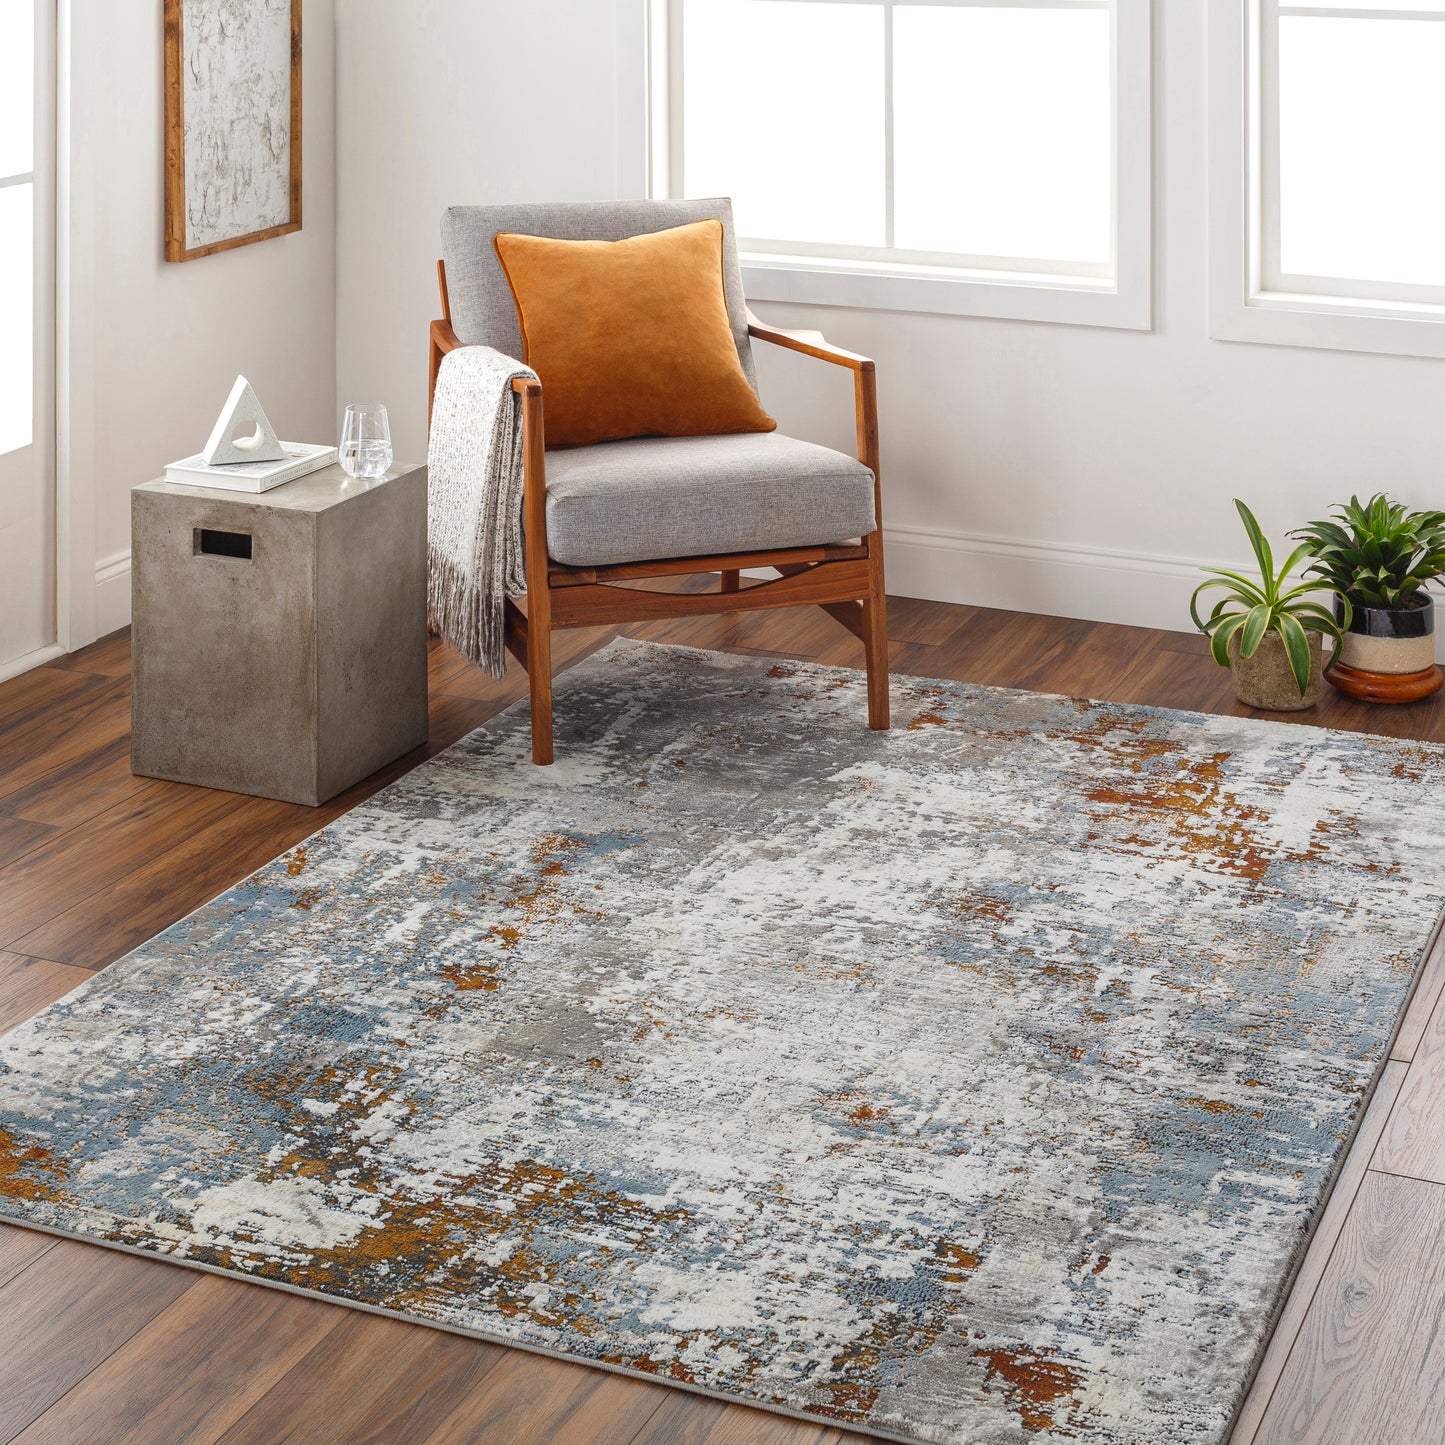 Allegro plus 31124 Machine Woven Synthetic Blend Indoor Area Rug by Surya Rugs